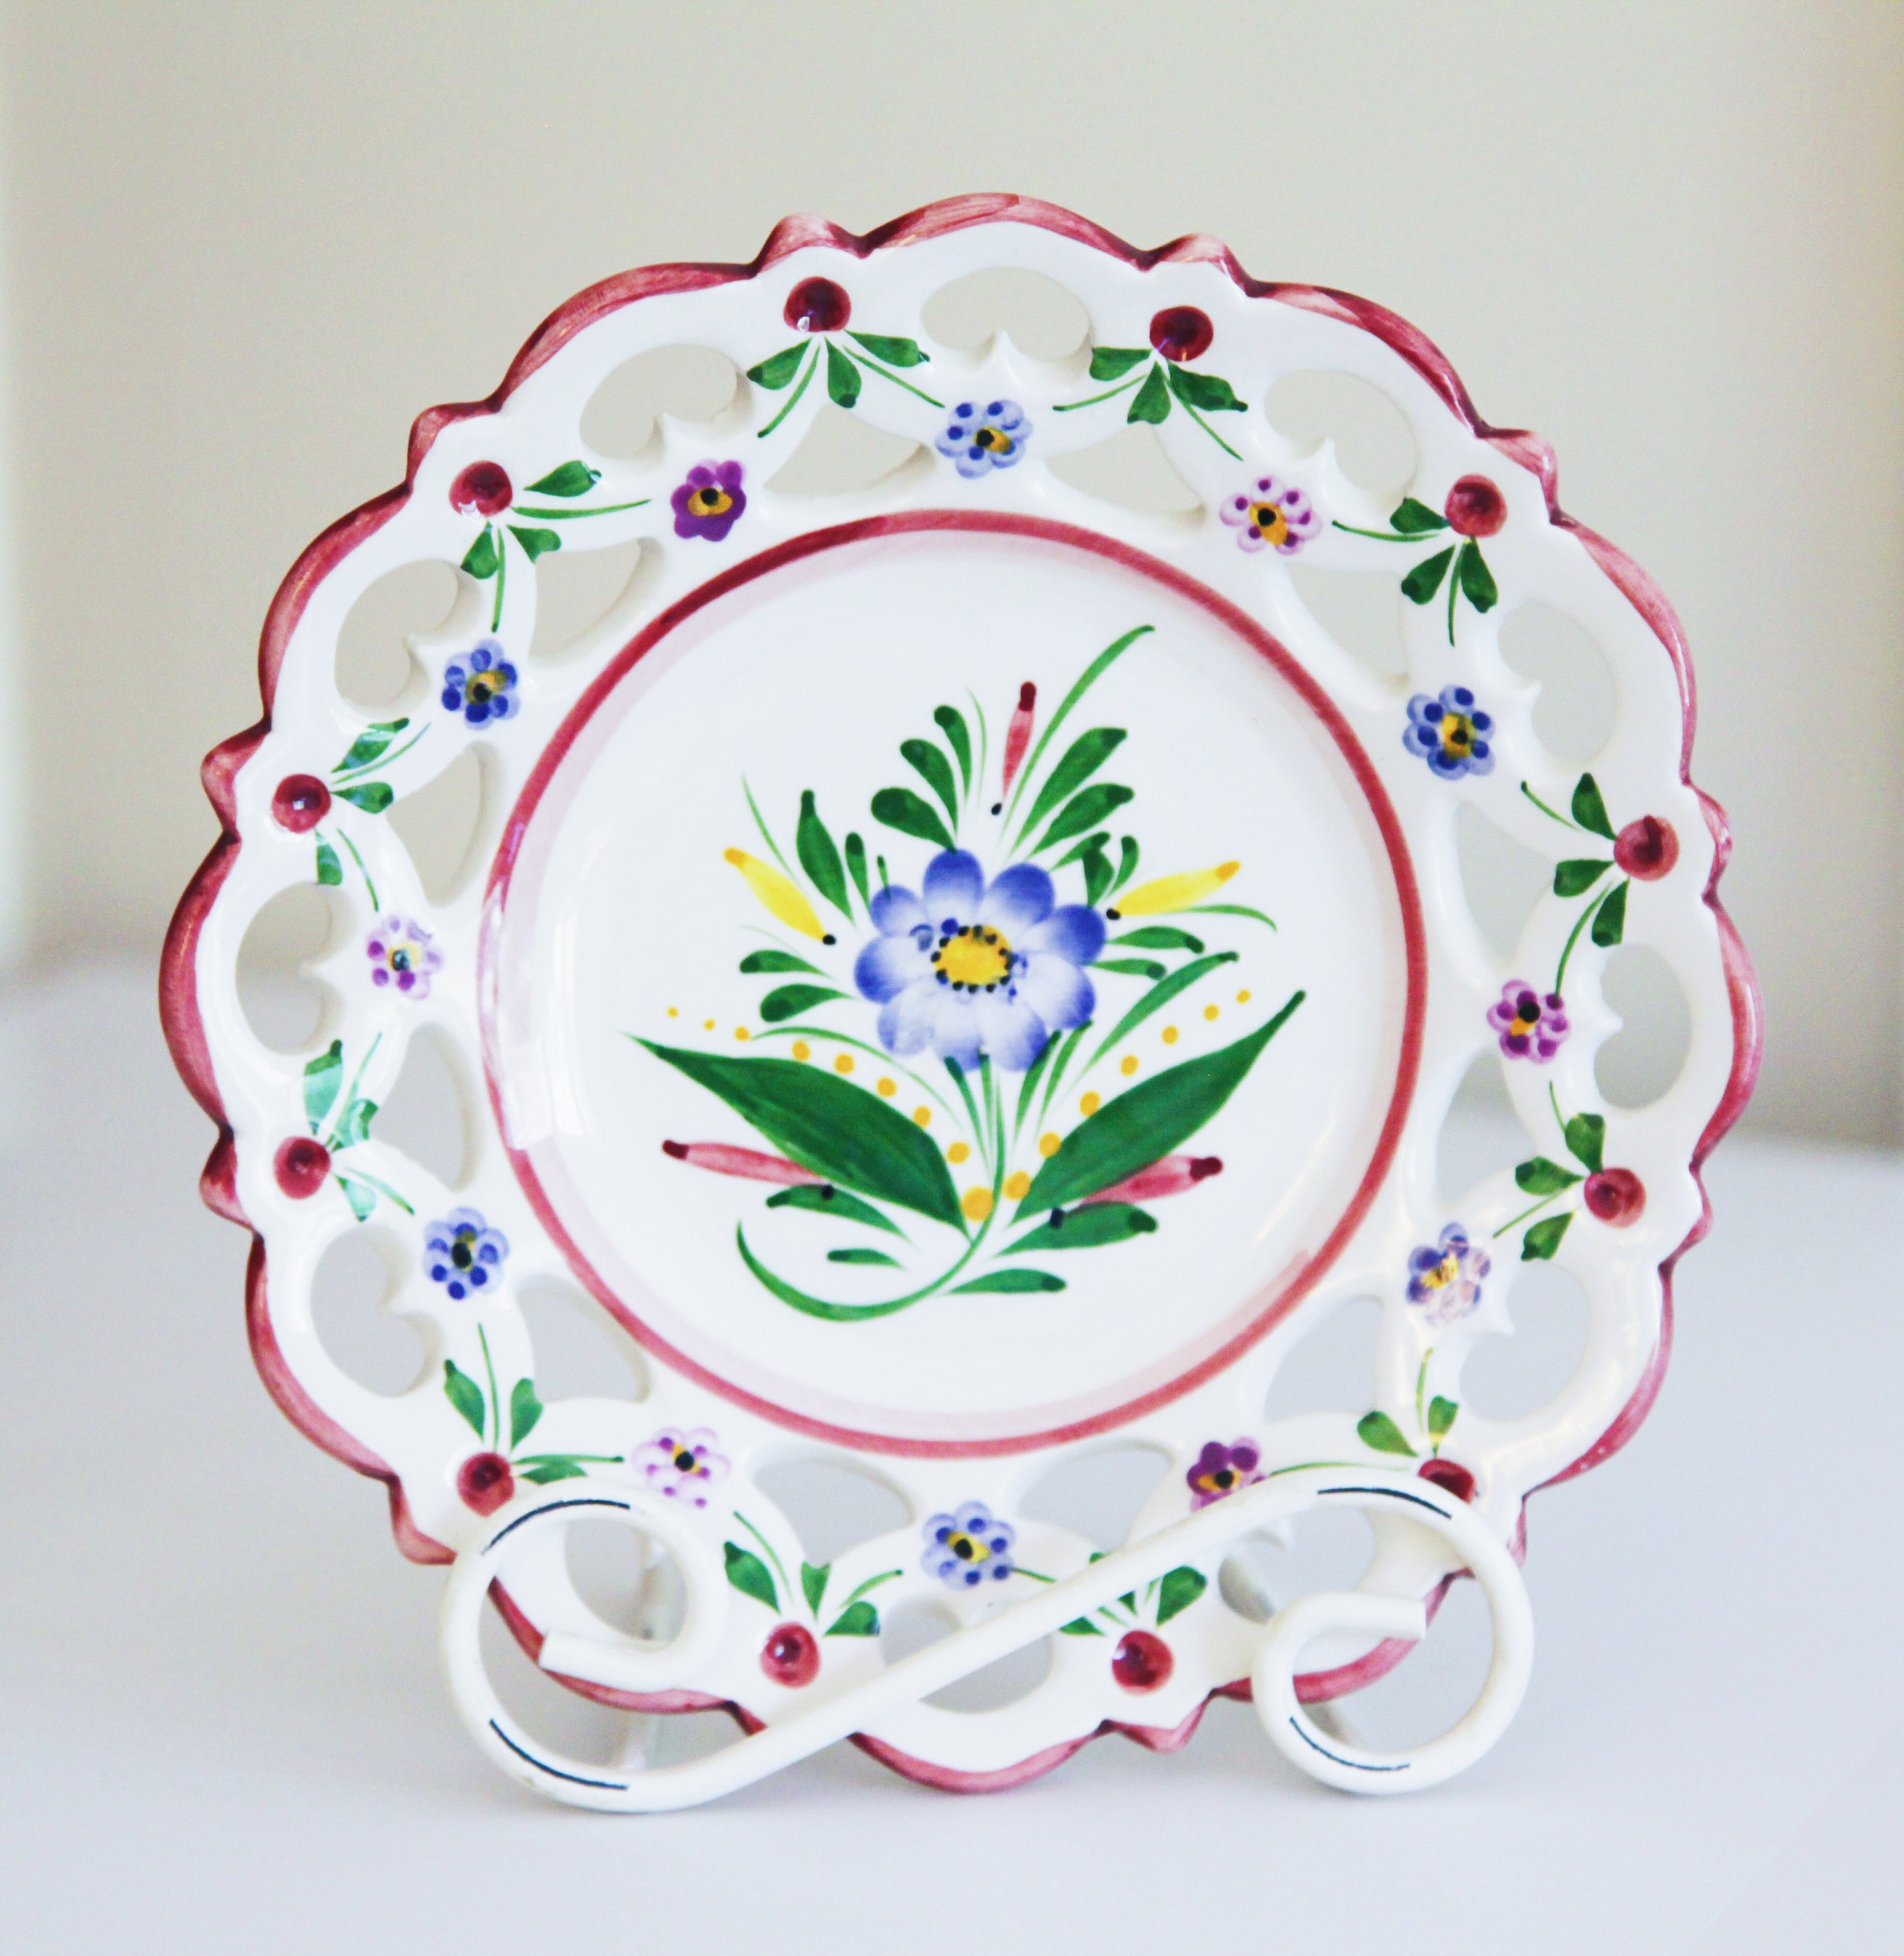 24 Lovely Raymond Waites Vase 2024 free download raymond waites vase of hand painted pottery wall plate made in portugal etsy intended for dc29fc294c28ezoom